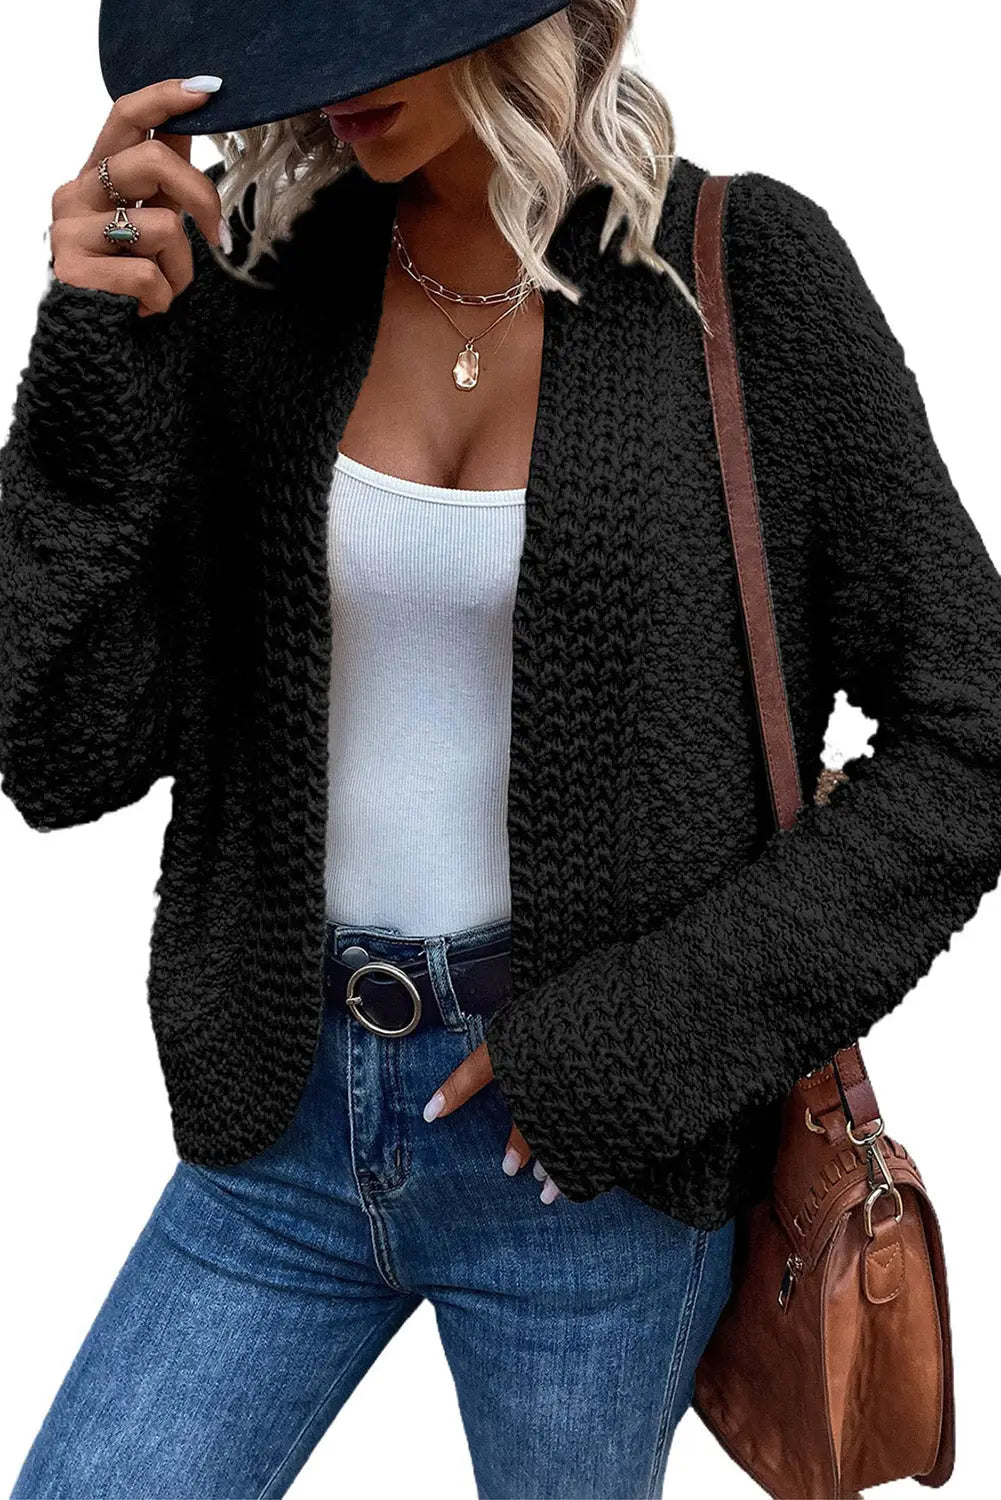 Gray popcorn knit open front cardigan - sweaters & cardigans